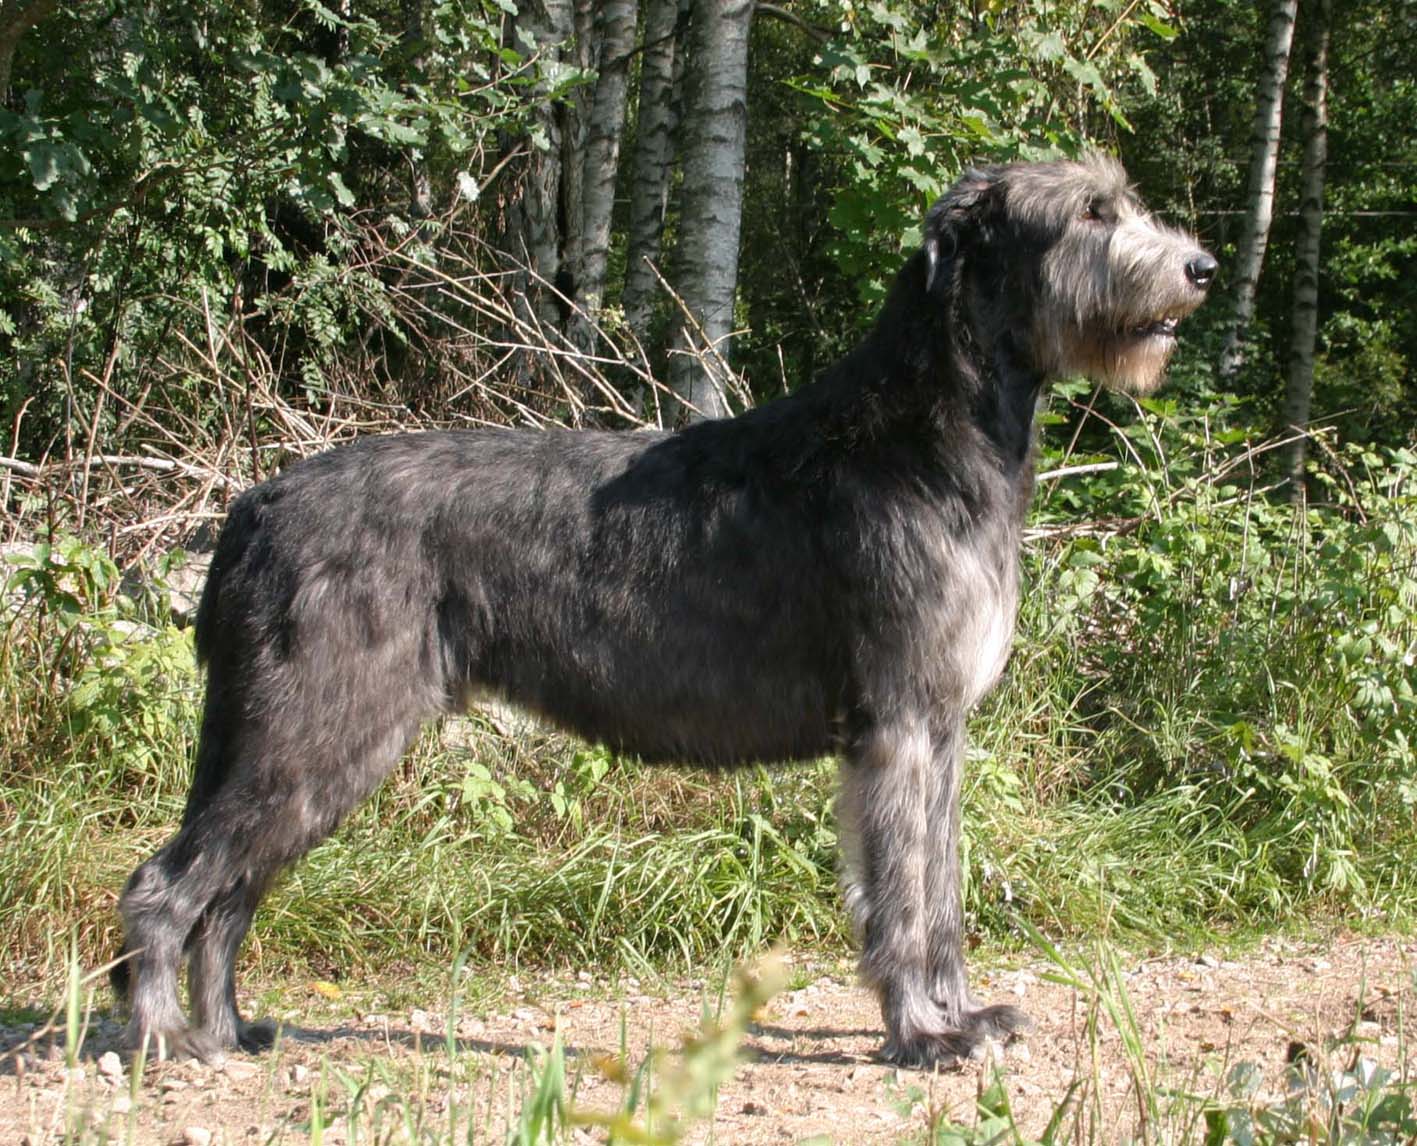 Irish Wolfhound dog in the forest photo and wallpaper. Beautiful